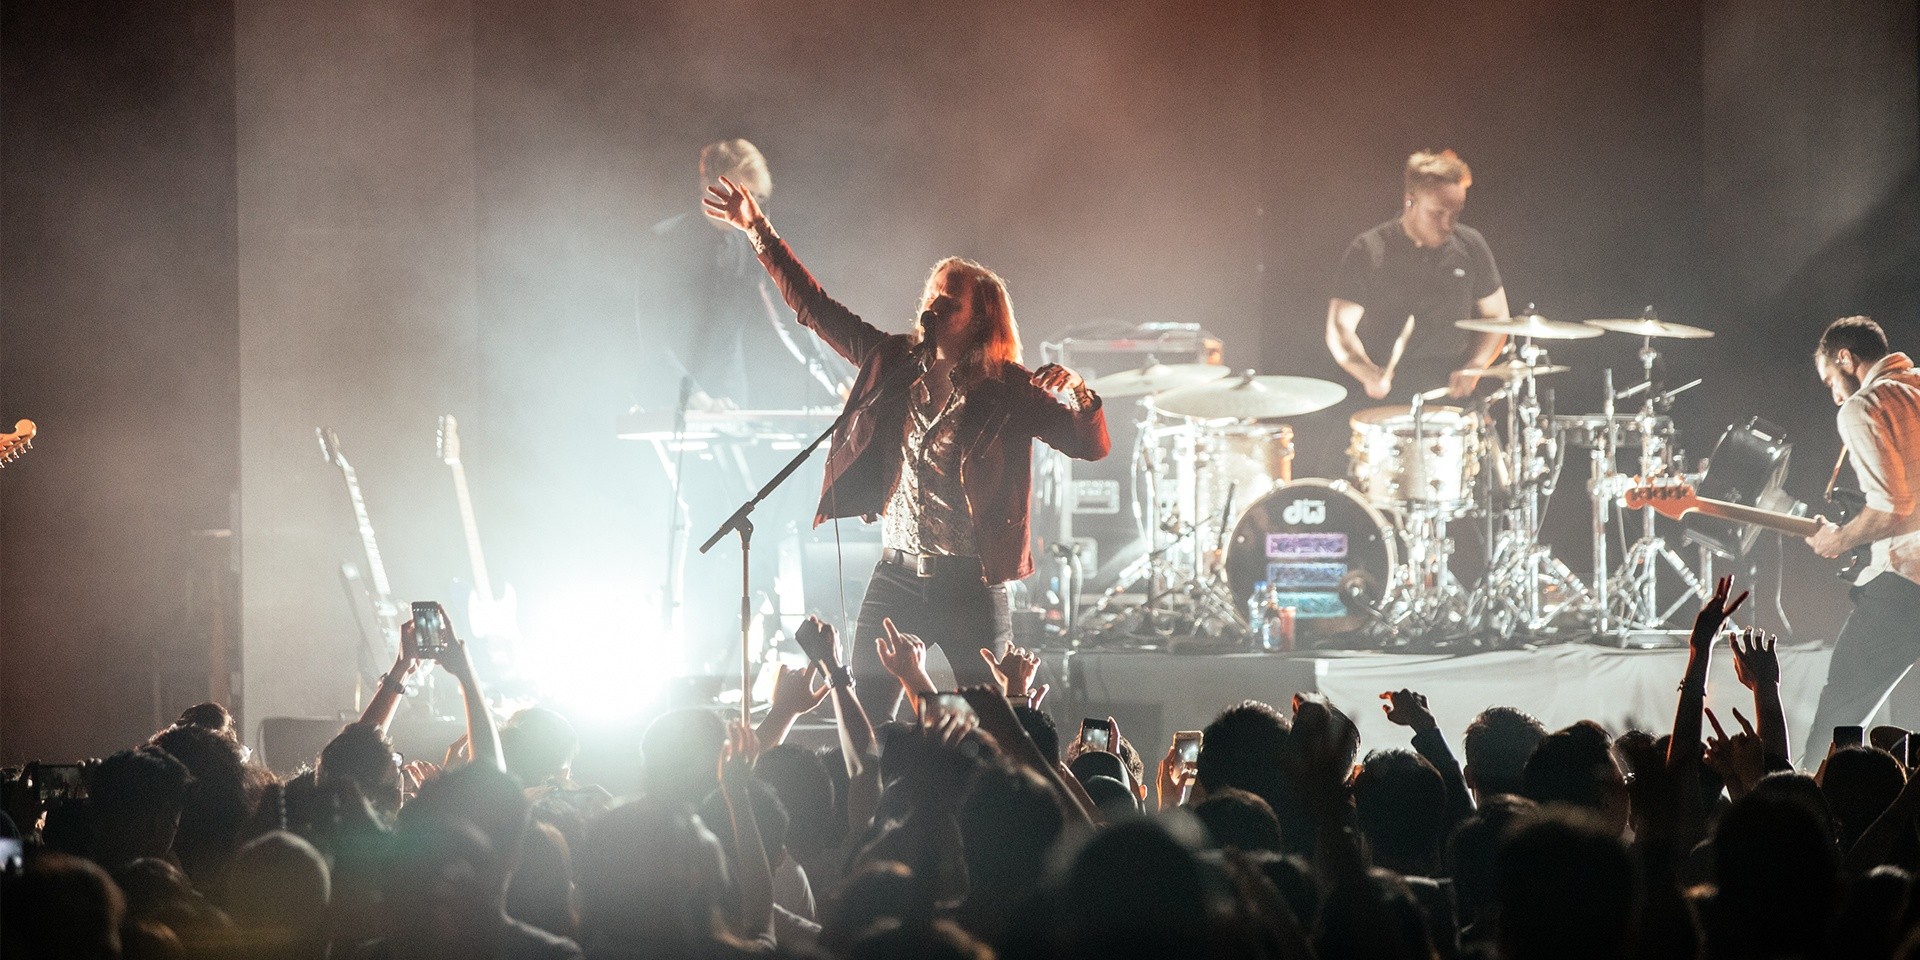 GIG REPORT: Two Door Cinema Club play their biggest venue yet in Singapore